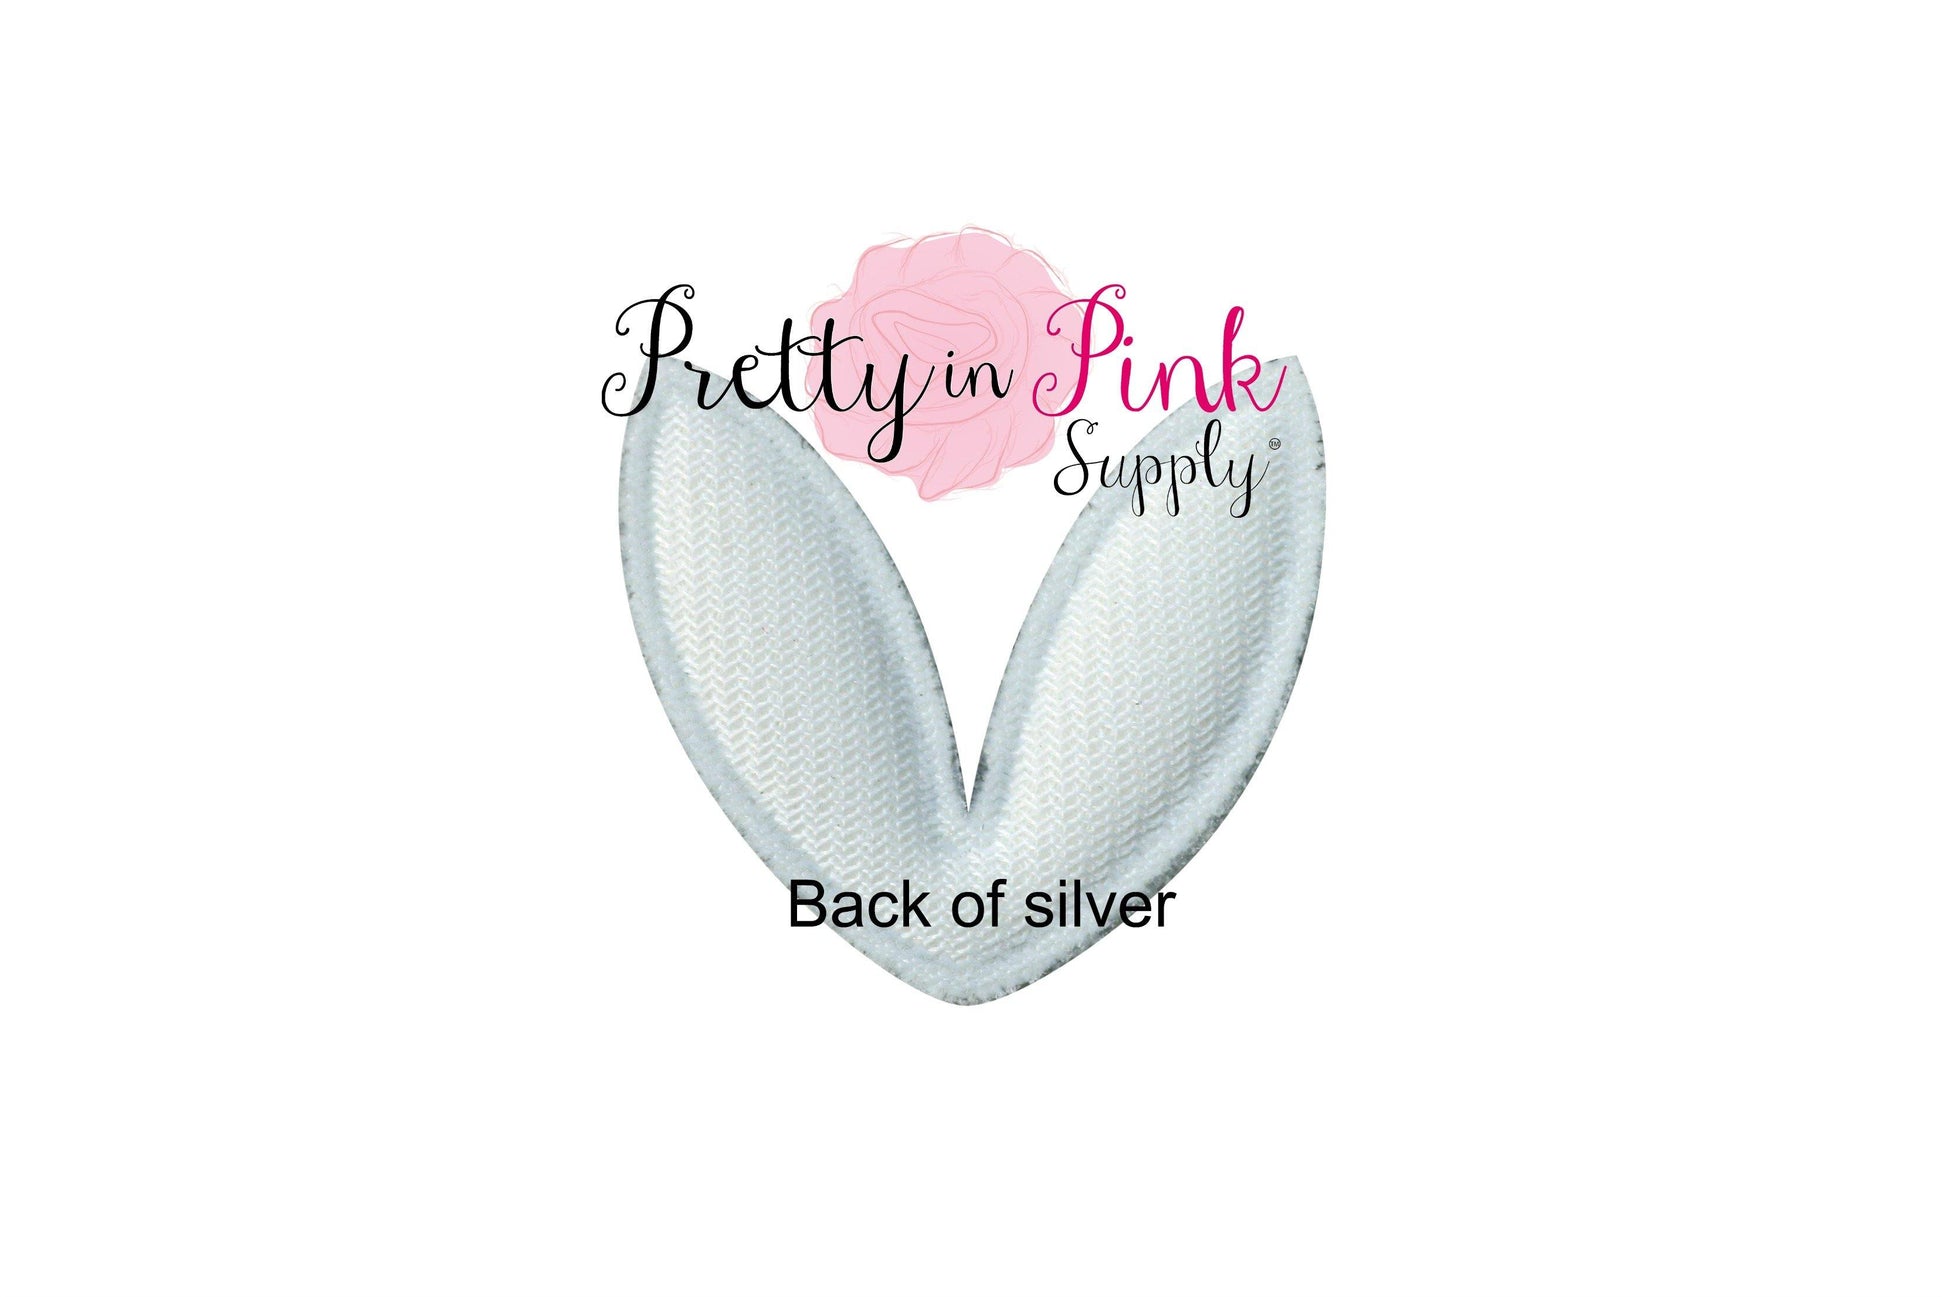 Glitter Padded Bunny Ears - Pretty in Pink Supply